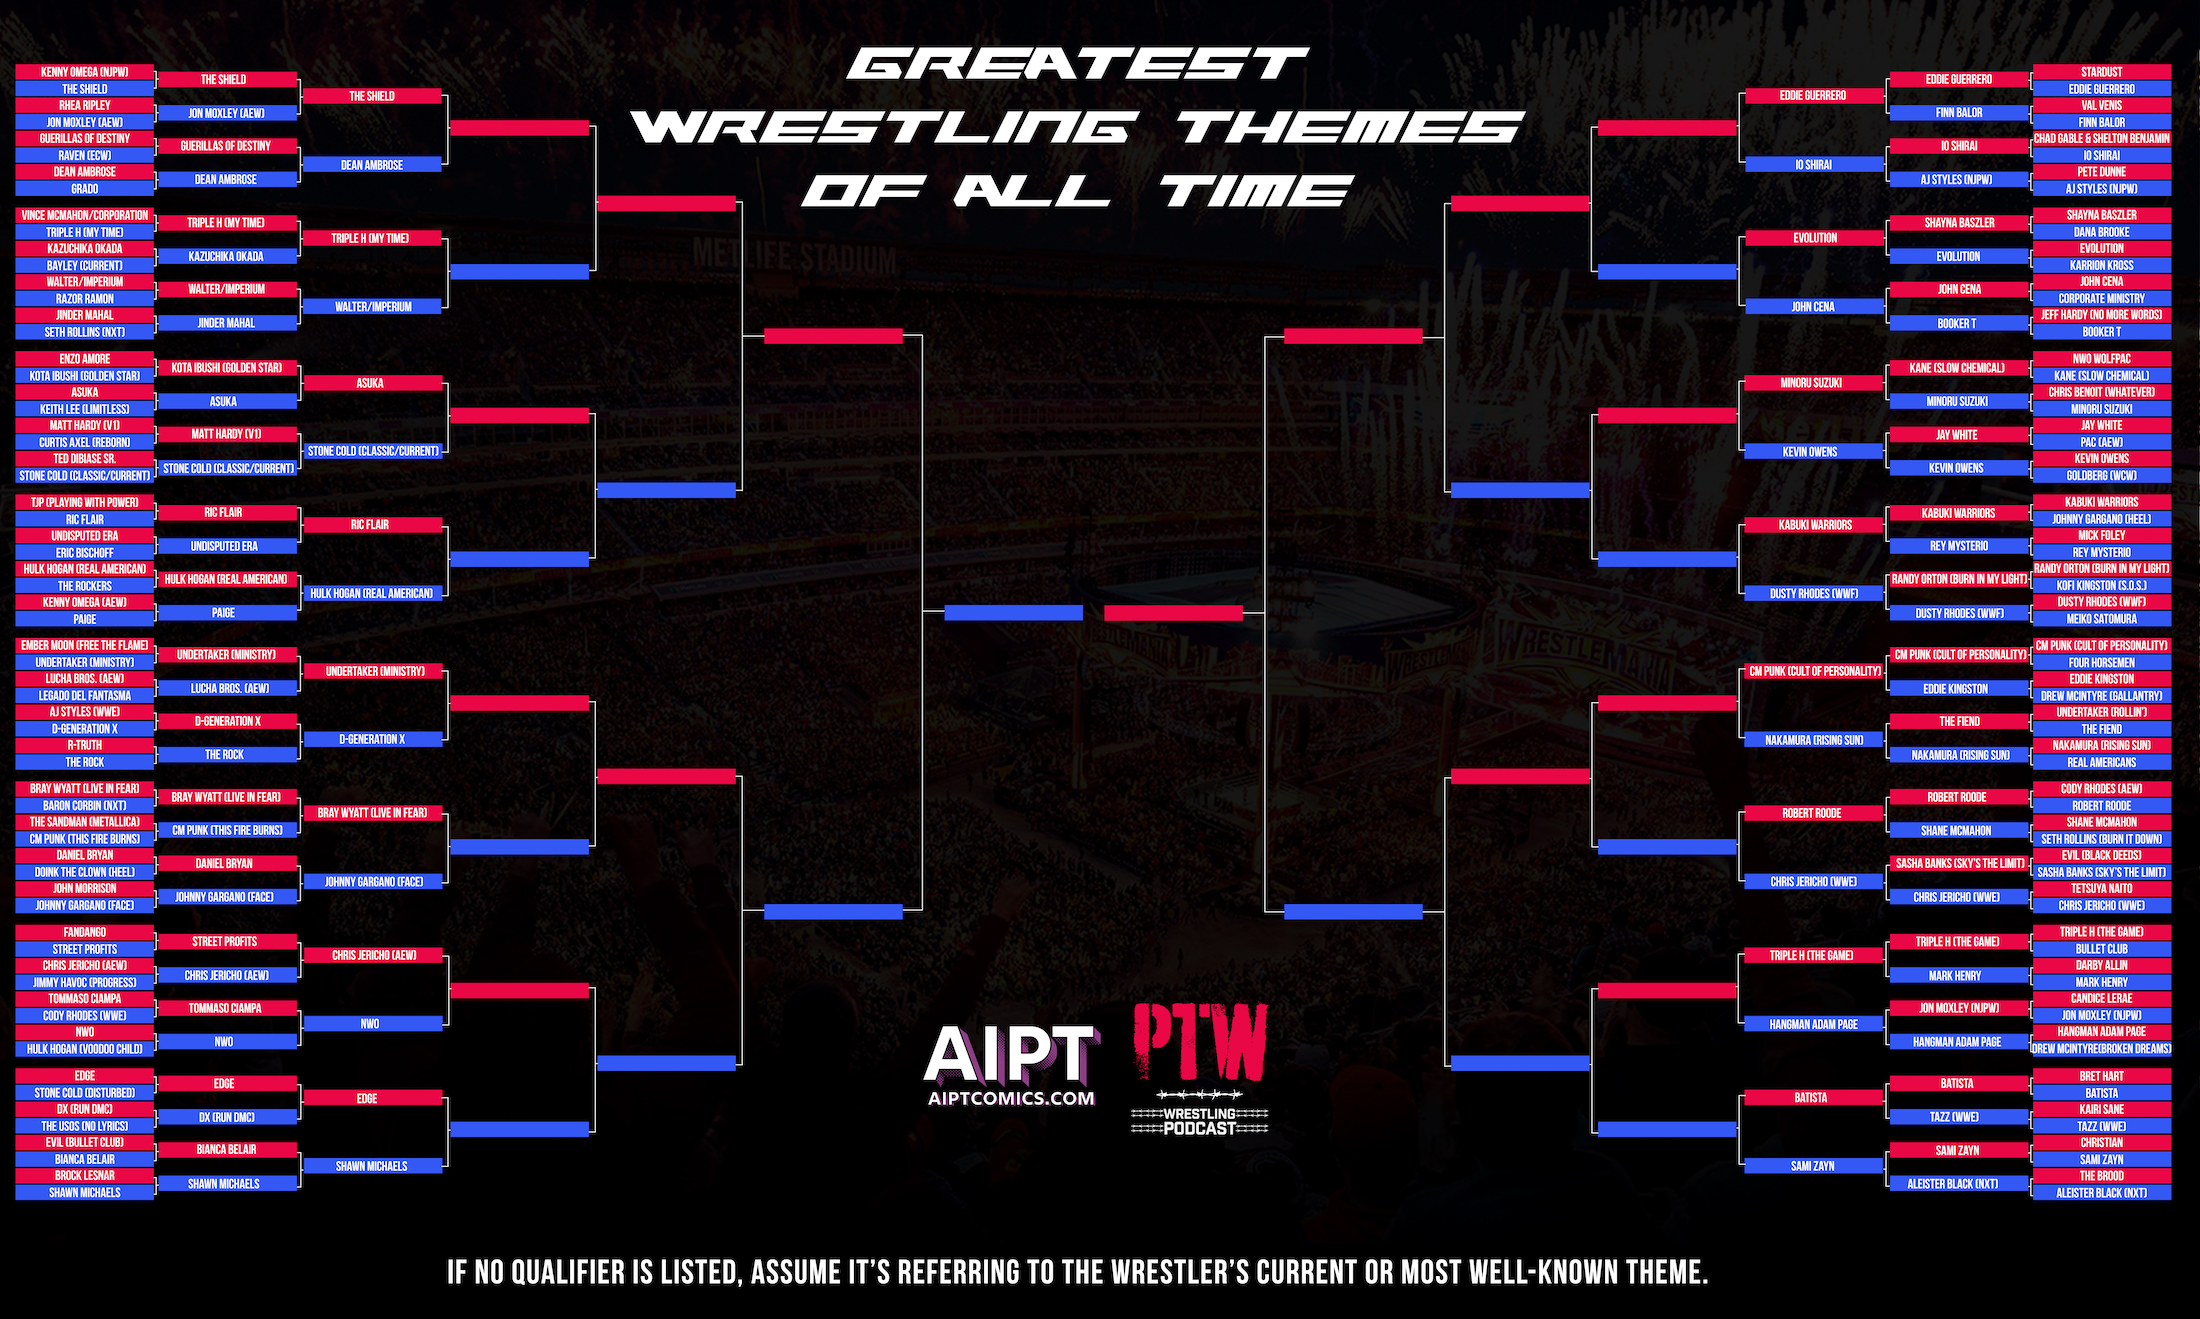 The Greatest Wrestling Themes of All Time: Round 3